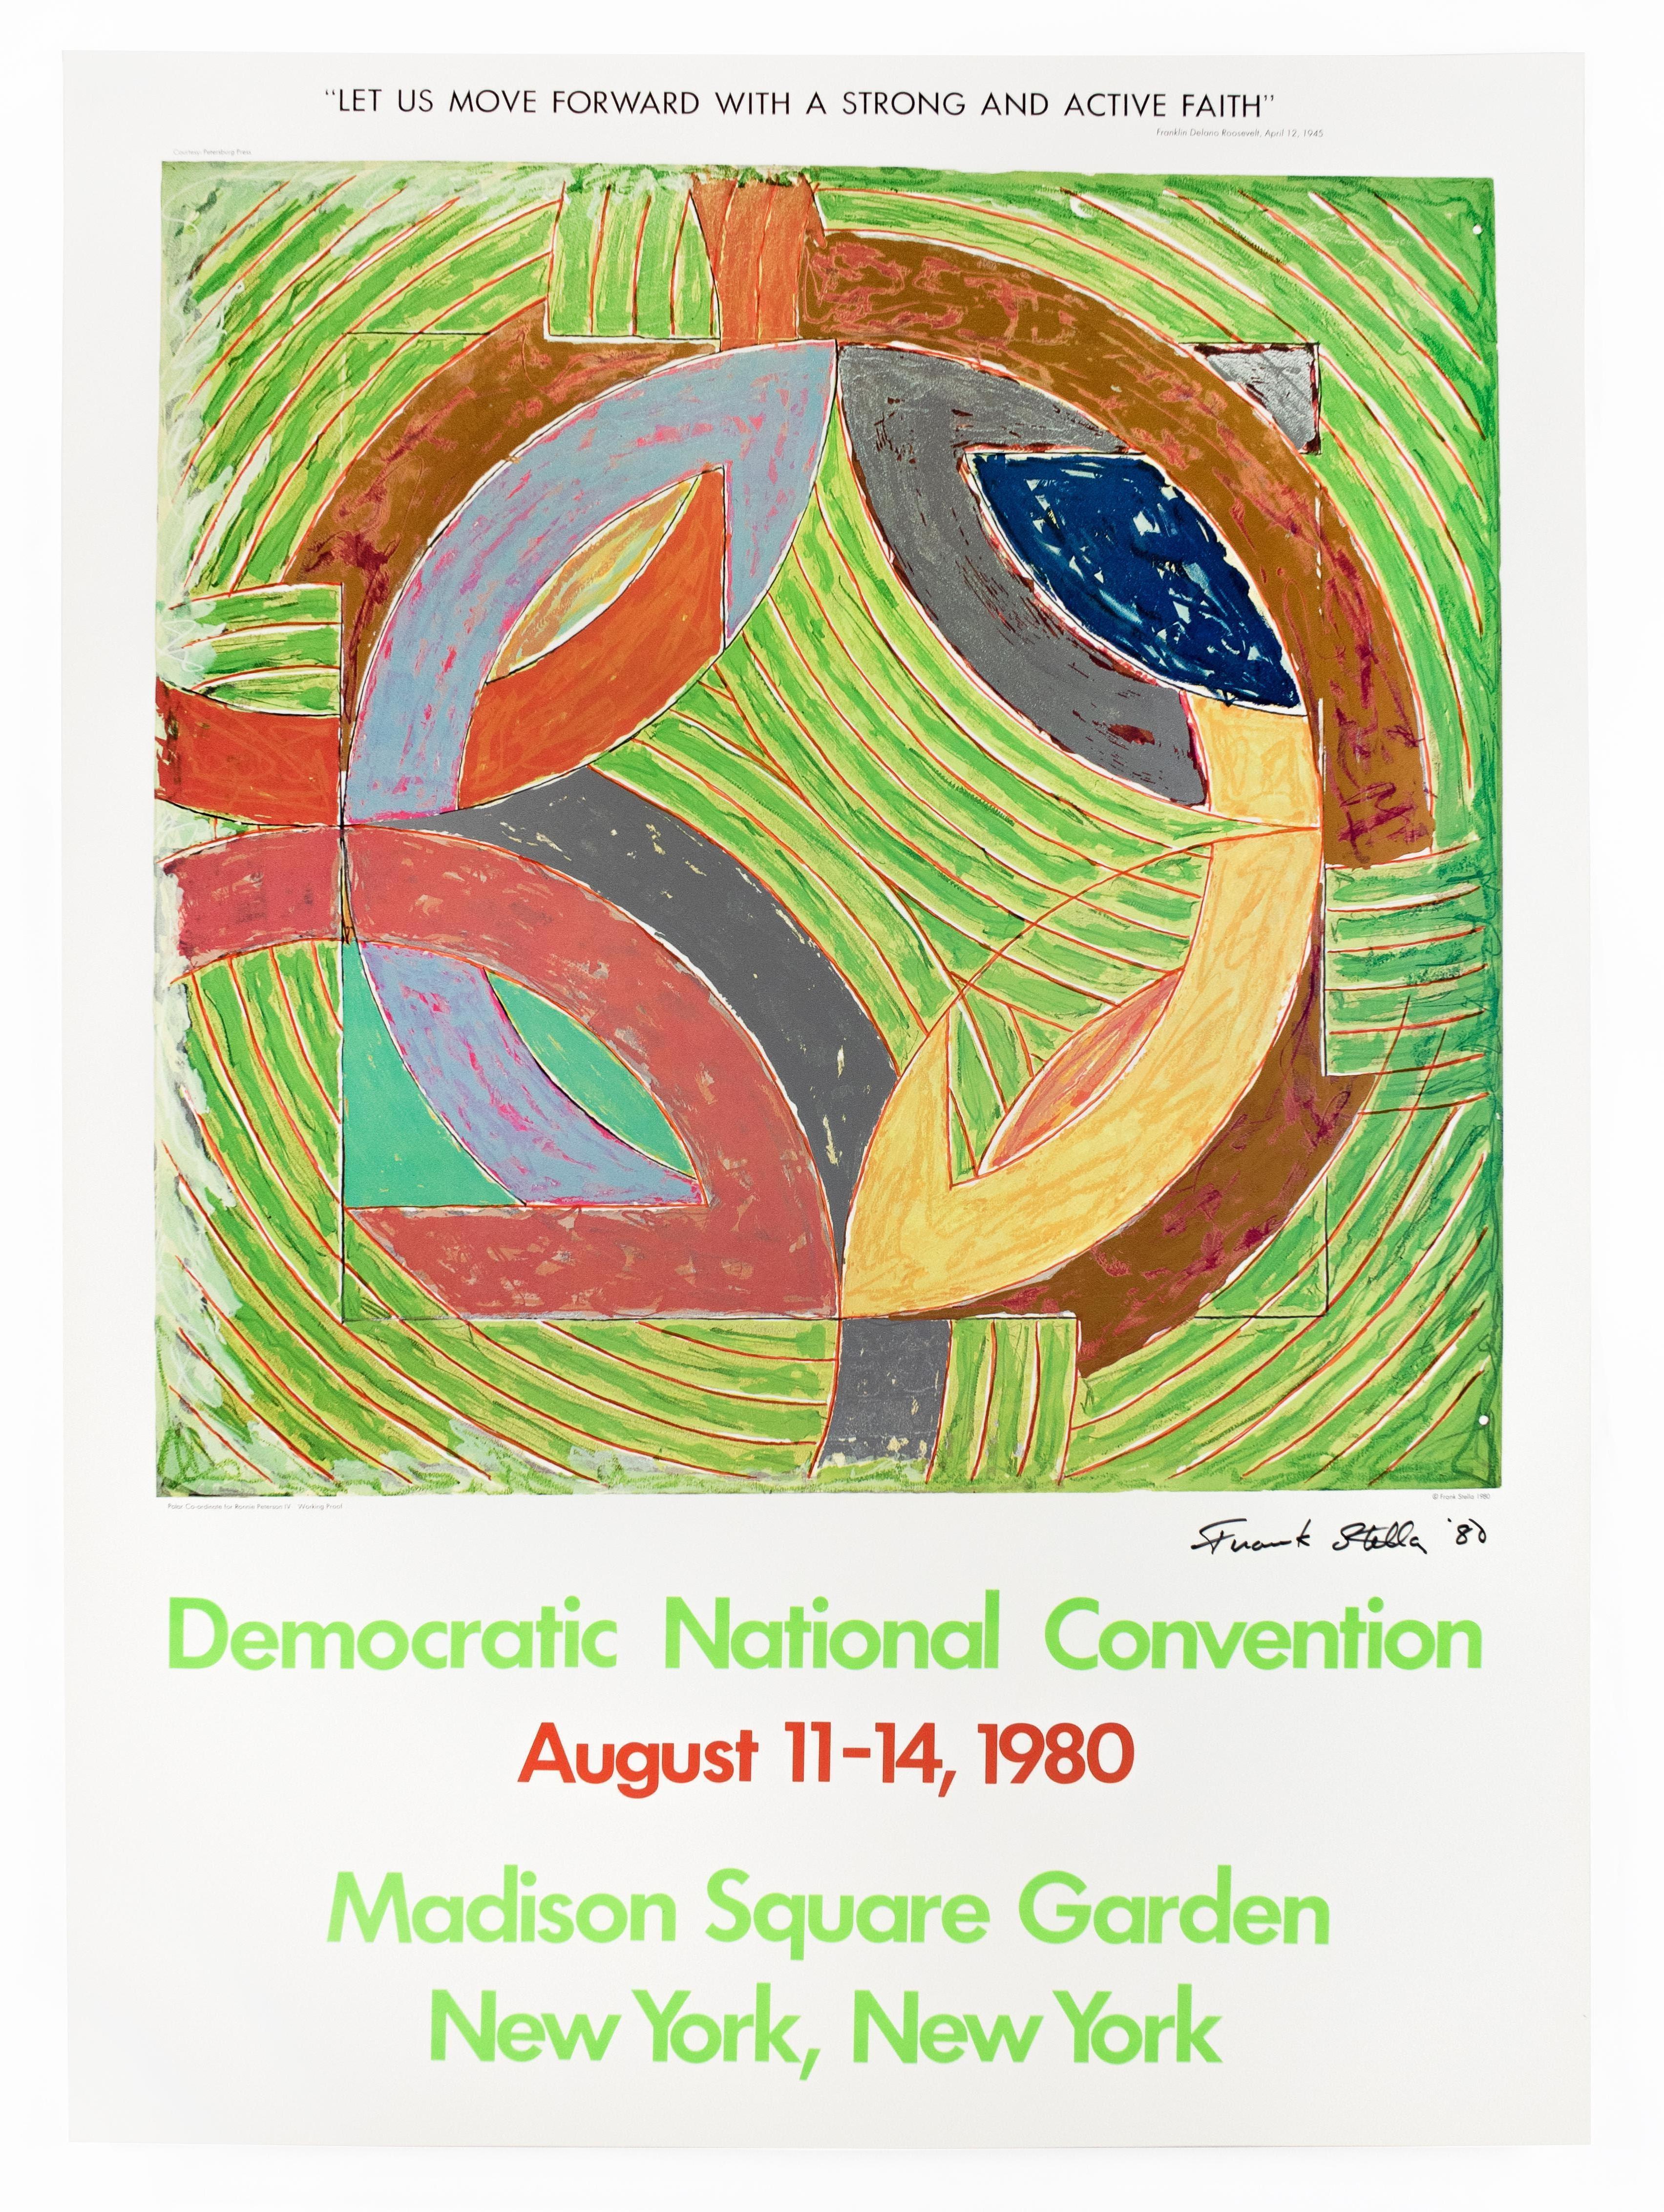 Colorful vintage poster for the 1980 Democratic National Convention, held in Madison Square Garden in New York.Concentric lines of orange and bright green interweave with strokes of pink, yellow, red, turquoise, silver, and gold. Printed with